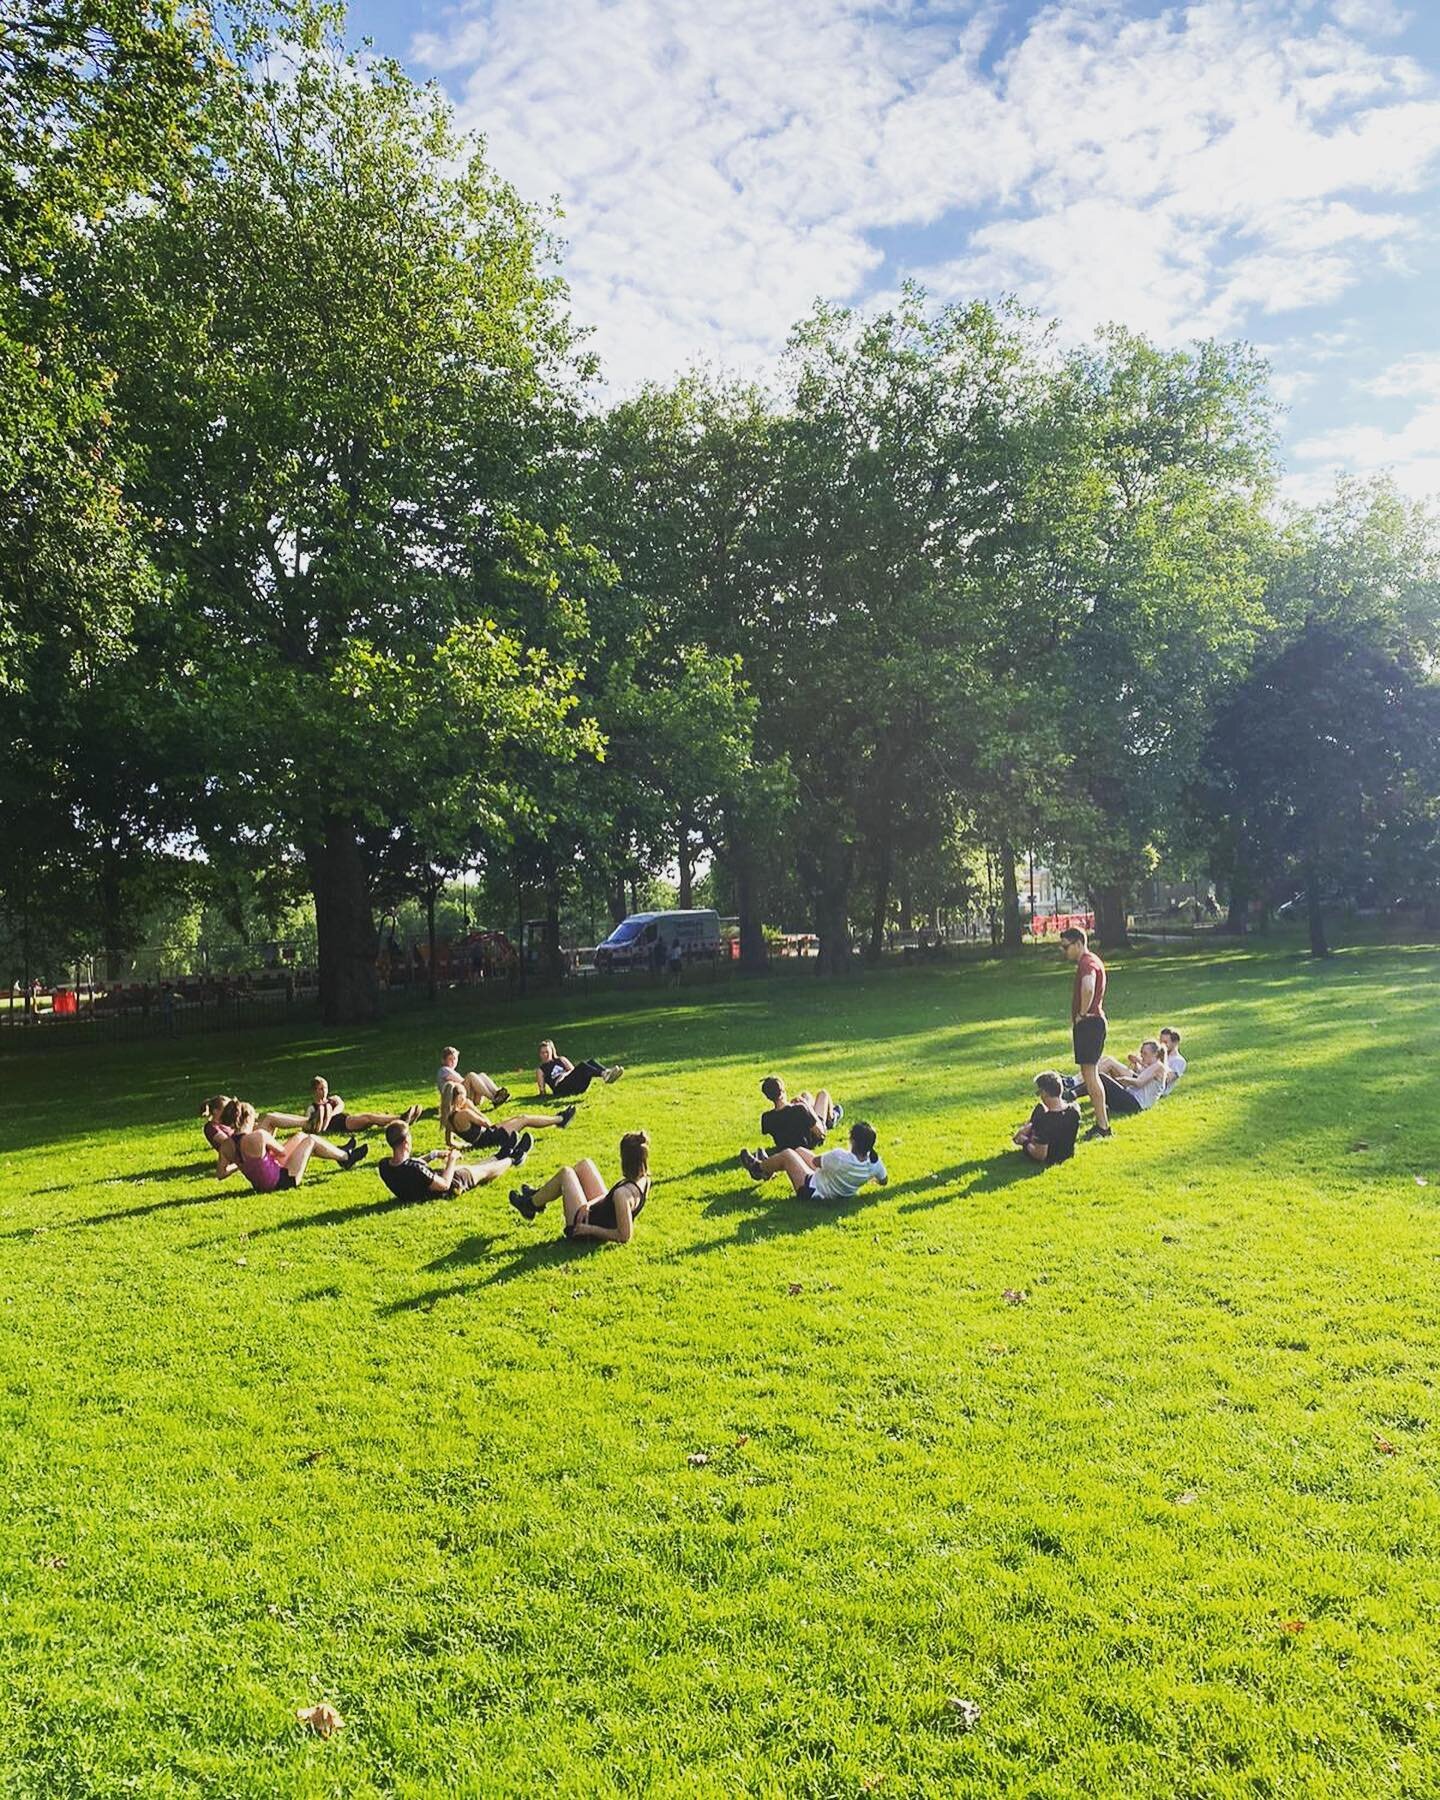 Mainly standing.
.
.
.
.
.
.
.
.
.
.
.

#SwiftHighbury #bootcamp #islington #highburyfields #exercise #fitness #fitnessclass #outdoorexercise #strong #burpees #pressup #situps #coreworkout #fit #fitfam #squats #lunges #london #run #running #pt #fitne